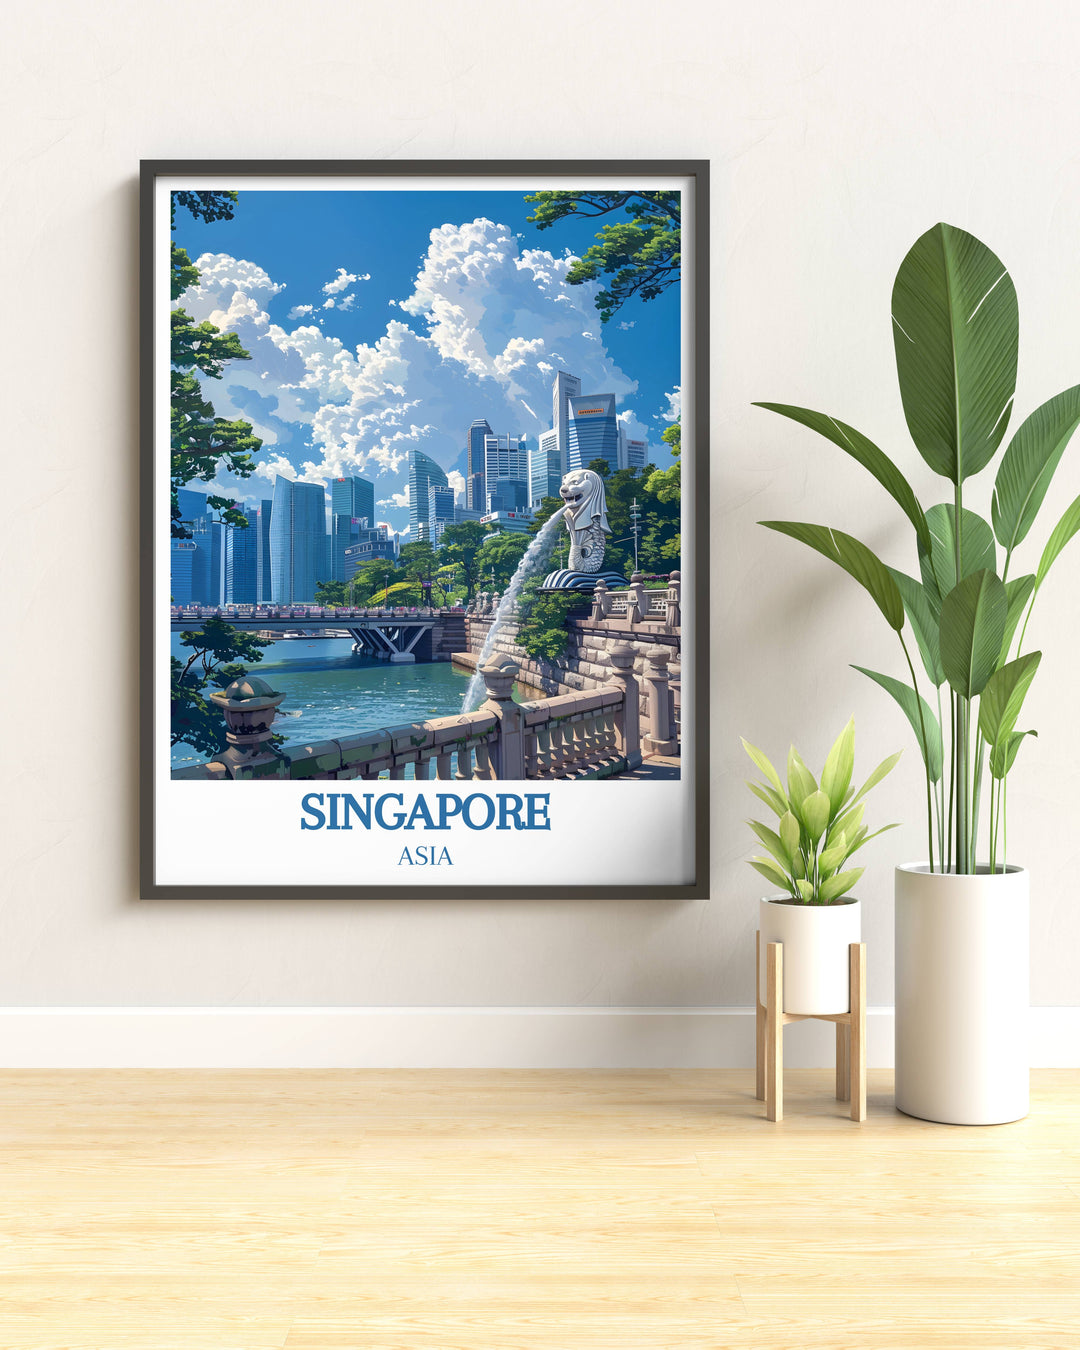 Celebrate Singapores rich culture with our Asia Prints, featuring detailed artistic depictions of Merlion Park, blending tradition and modernity.